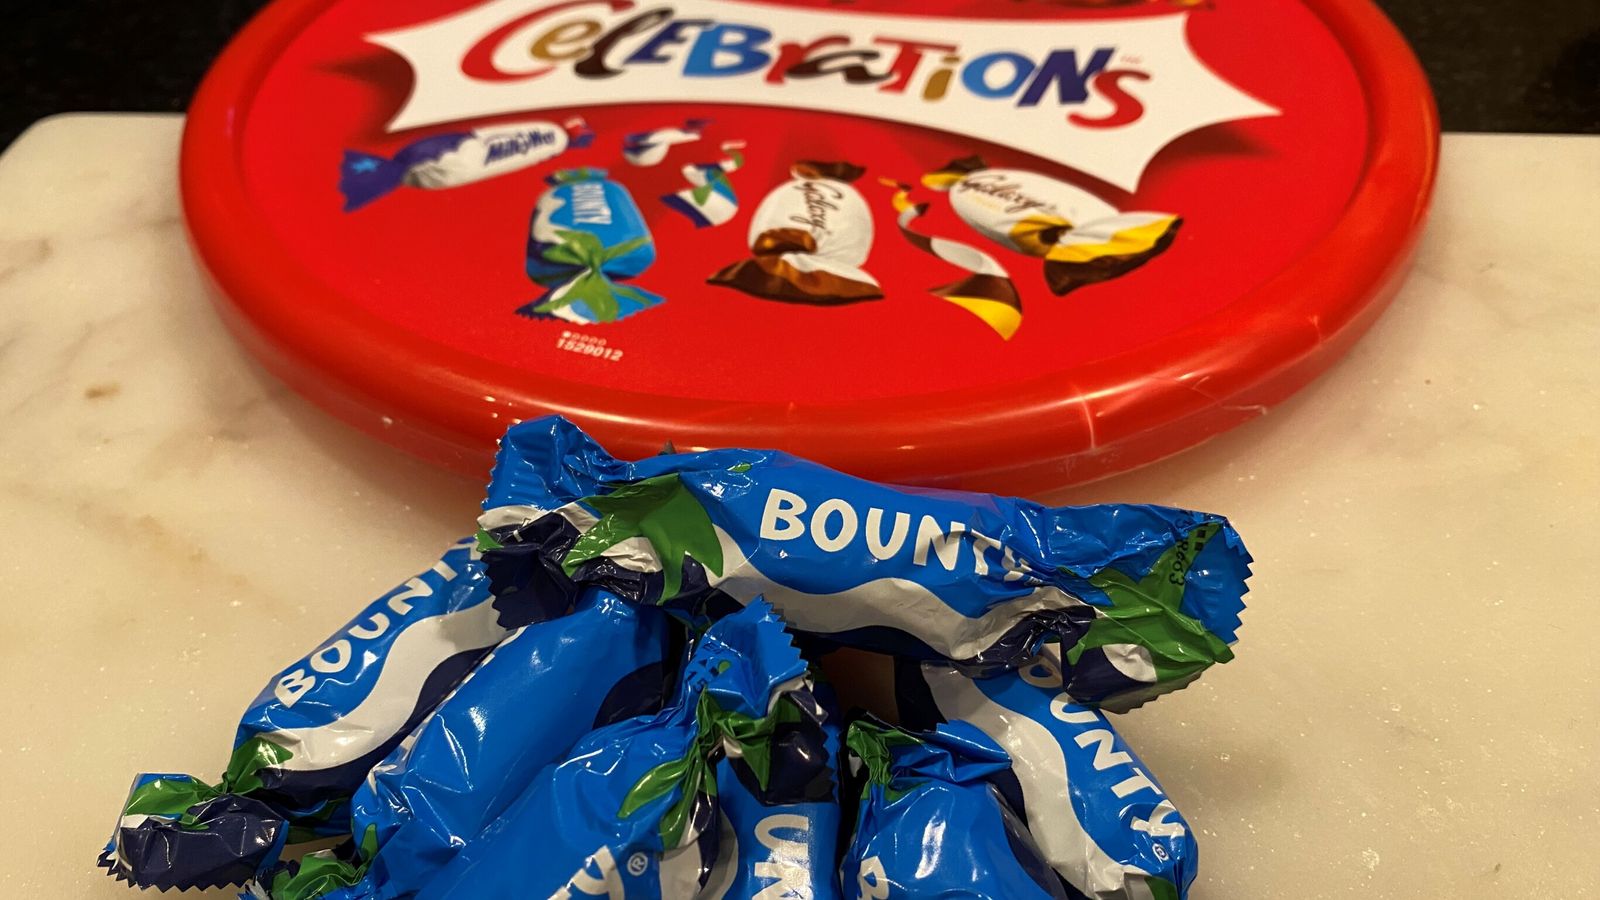 Bounty bars in tubs of Celebrations could be a lot harder to find this Christmas - here's why